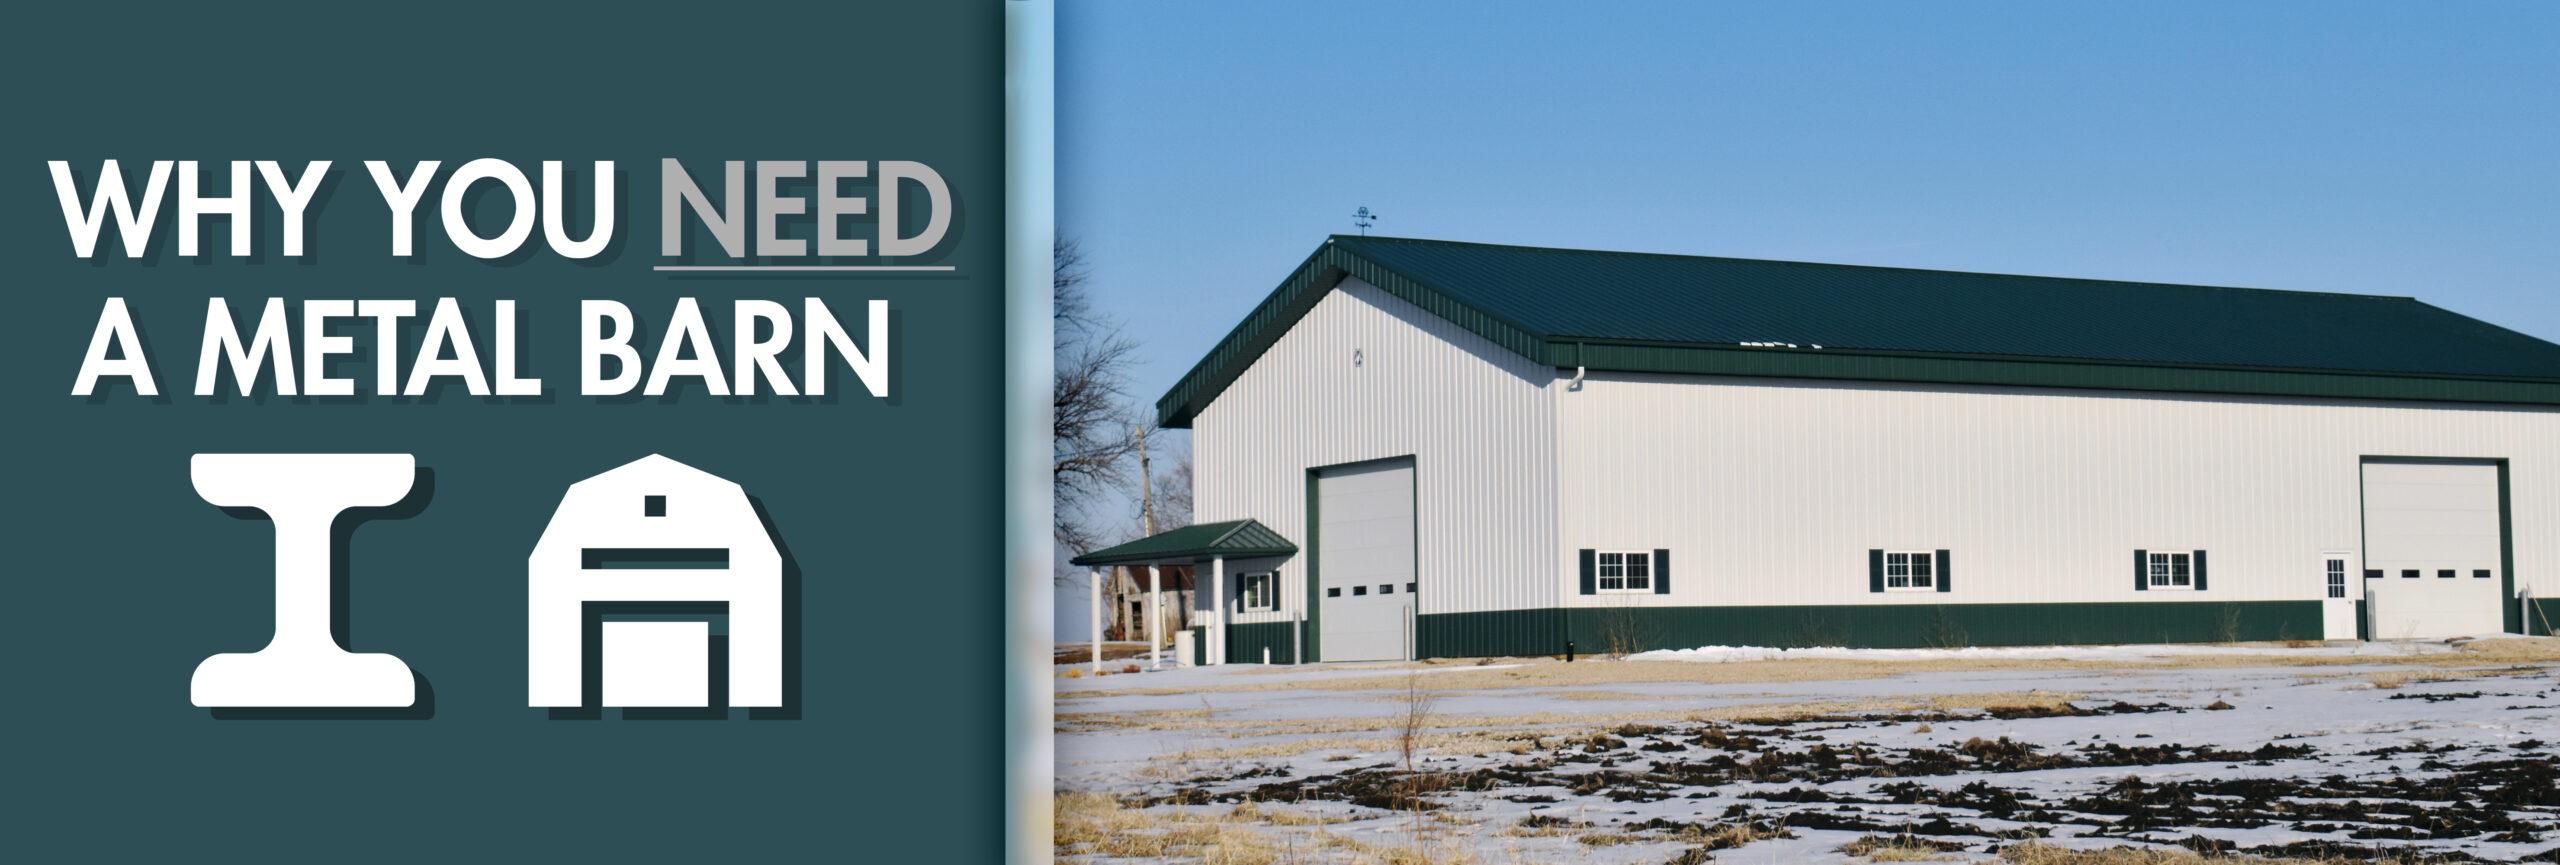 Custom Metal Barns: The Sustainable Building Choice You Didn’t Know You Needed